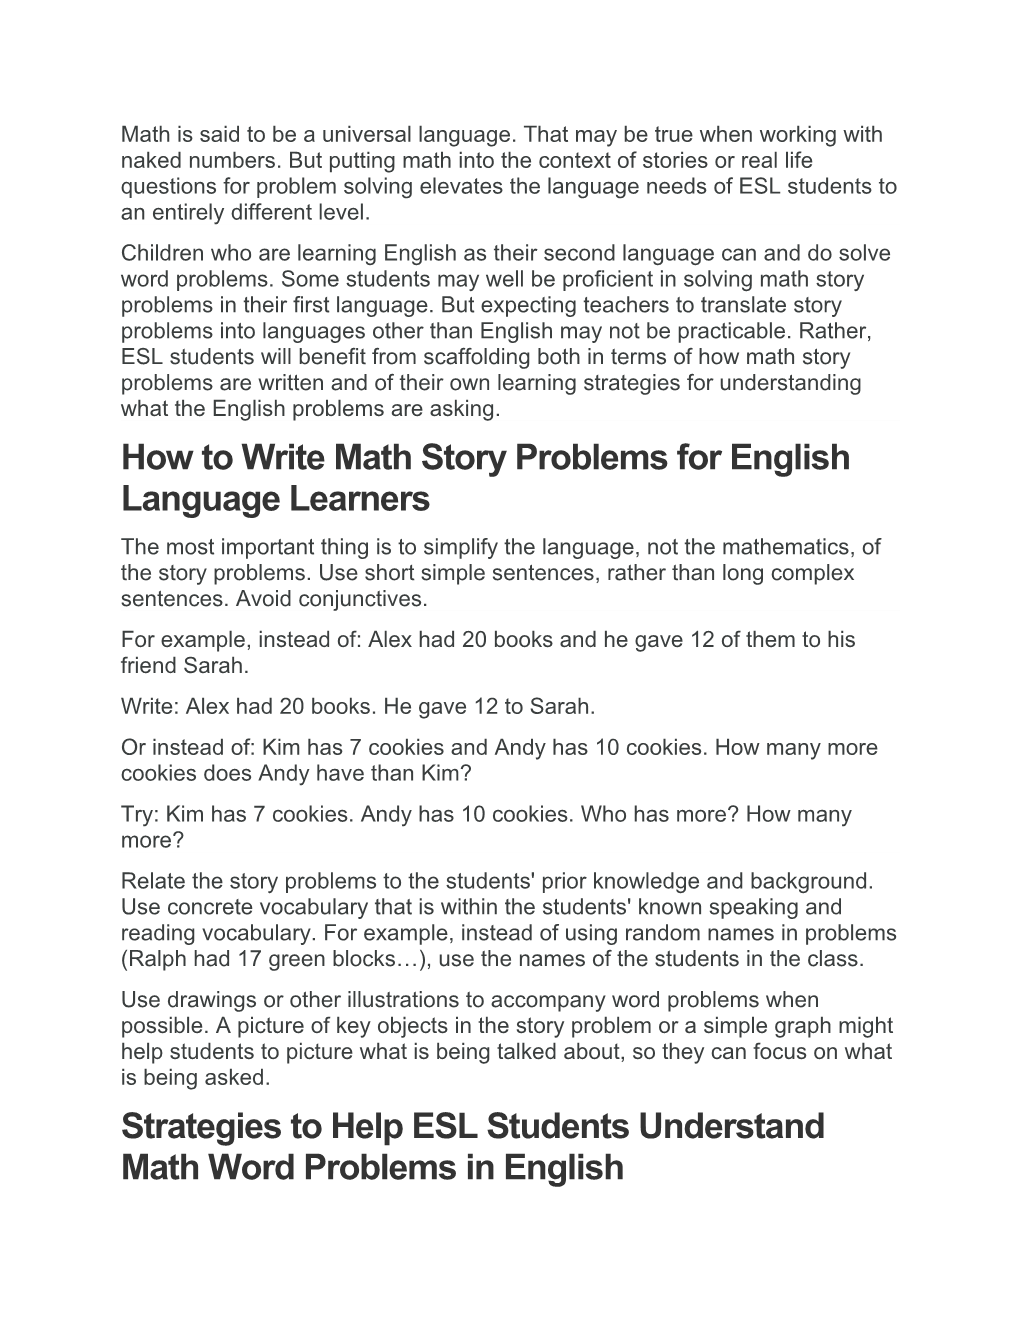 How to Write Math Story Problems for English Language Learners